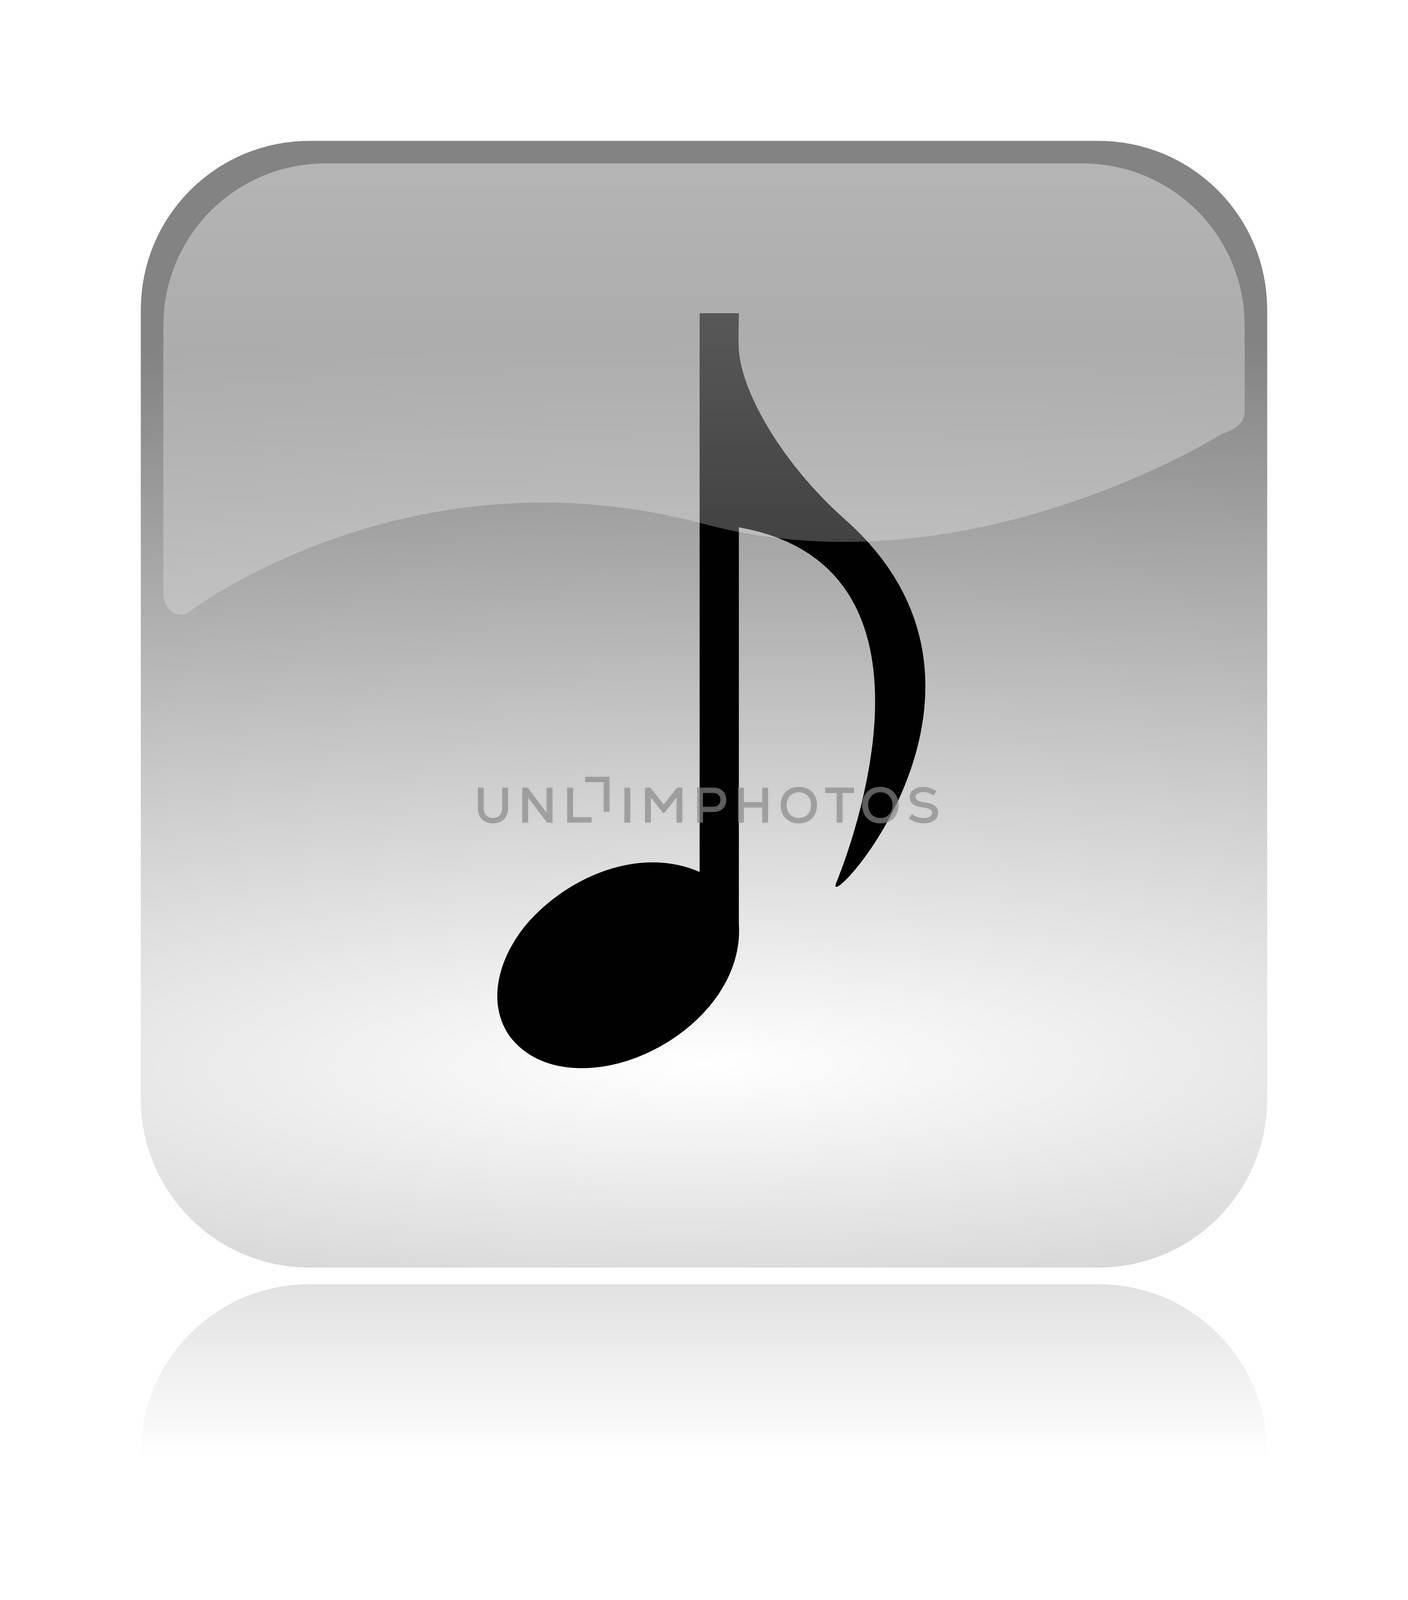 Notation Music App Rounded Square Icon with Reflection Illustration Isolated on White Background